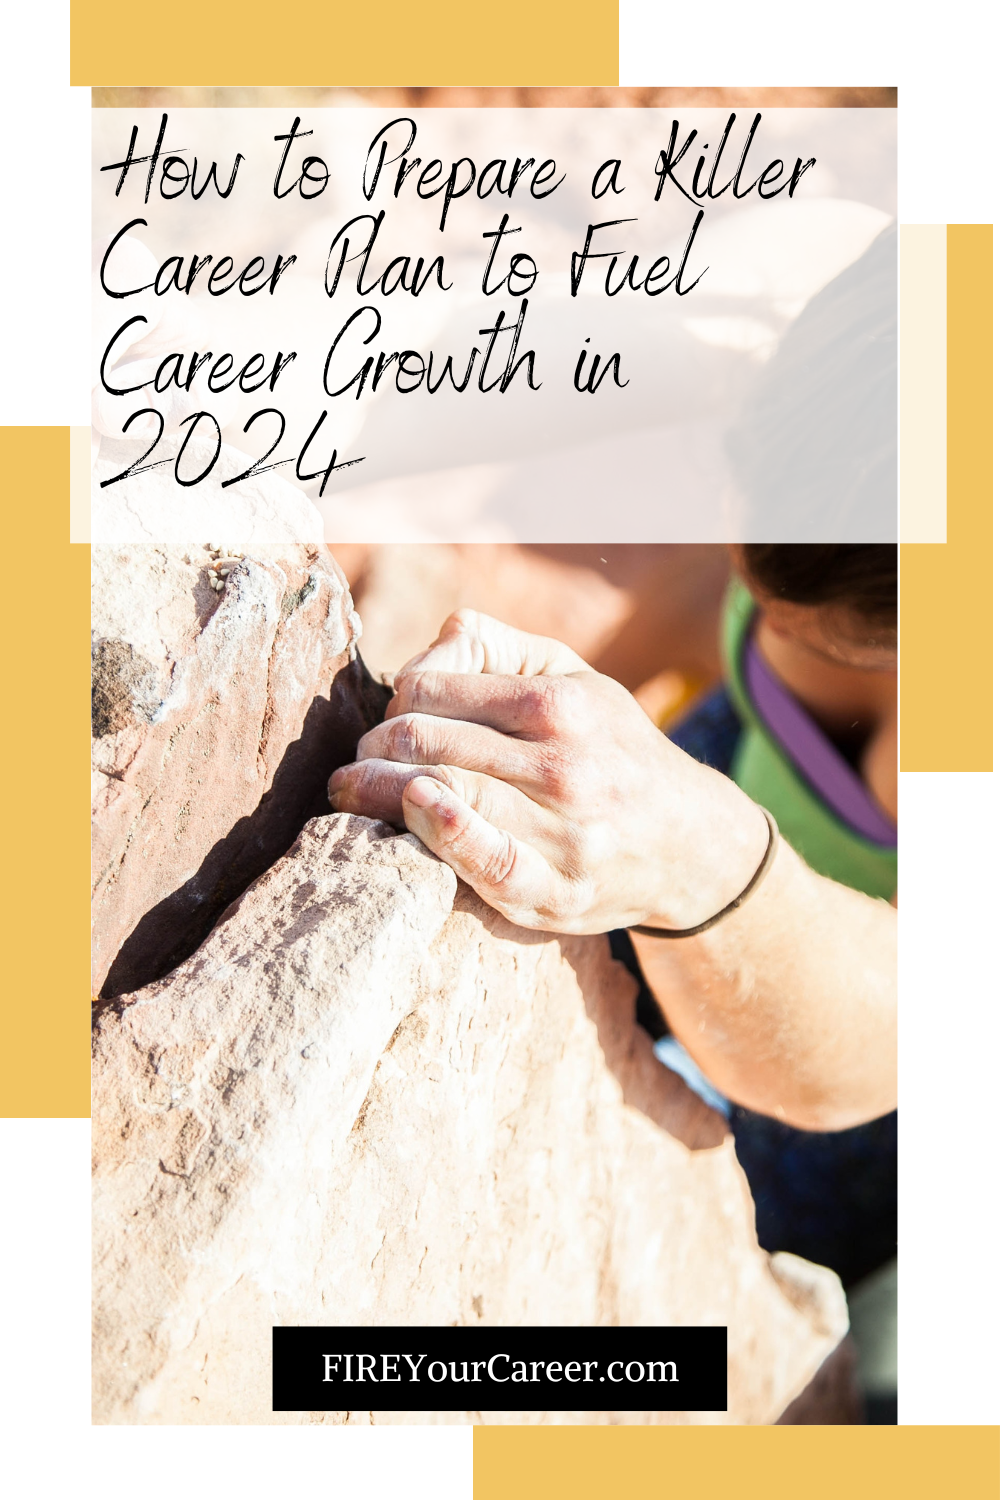 How to Prepare a Killer Career Plan to Fuel Career Growth in 2024 Pinterest (1)